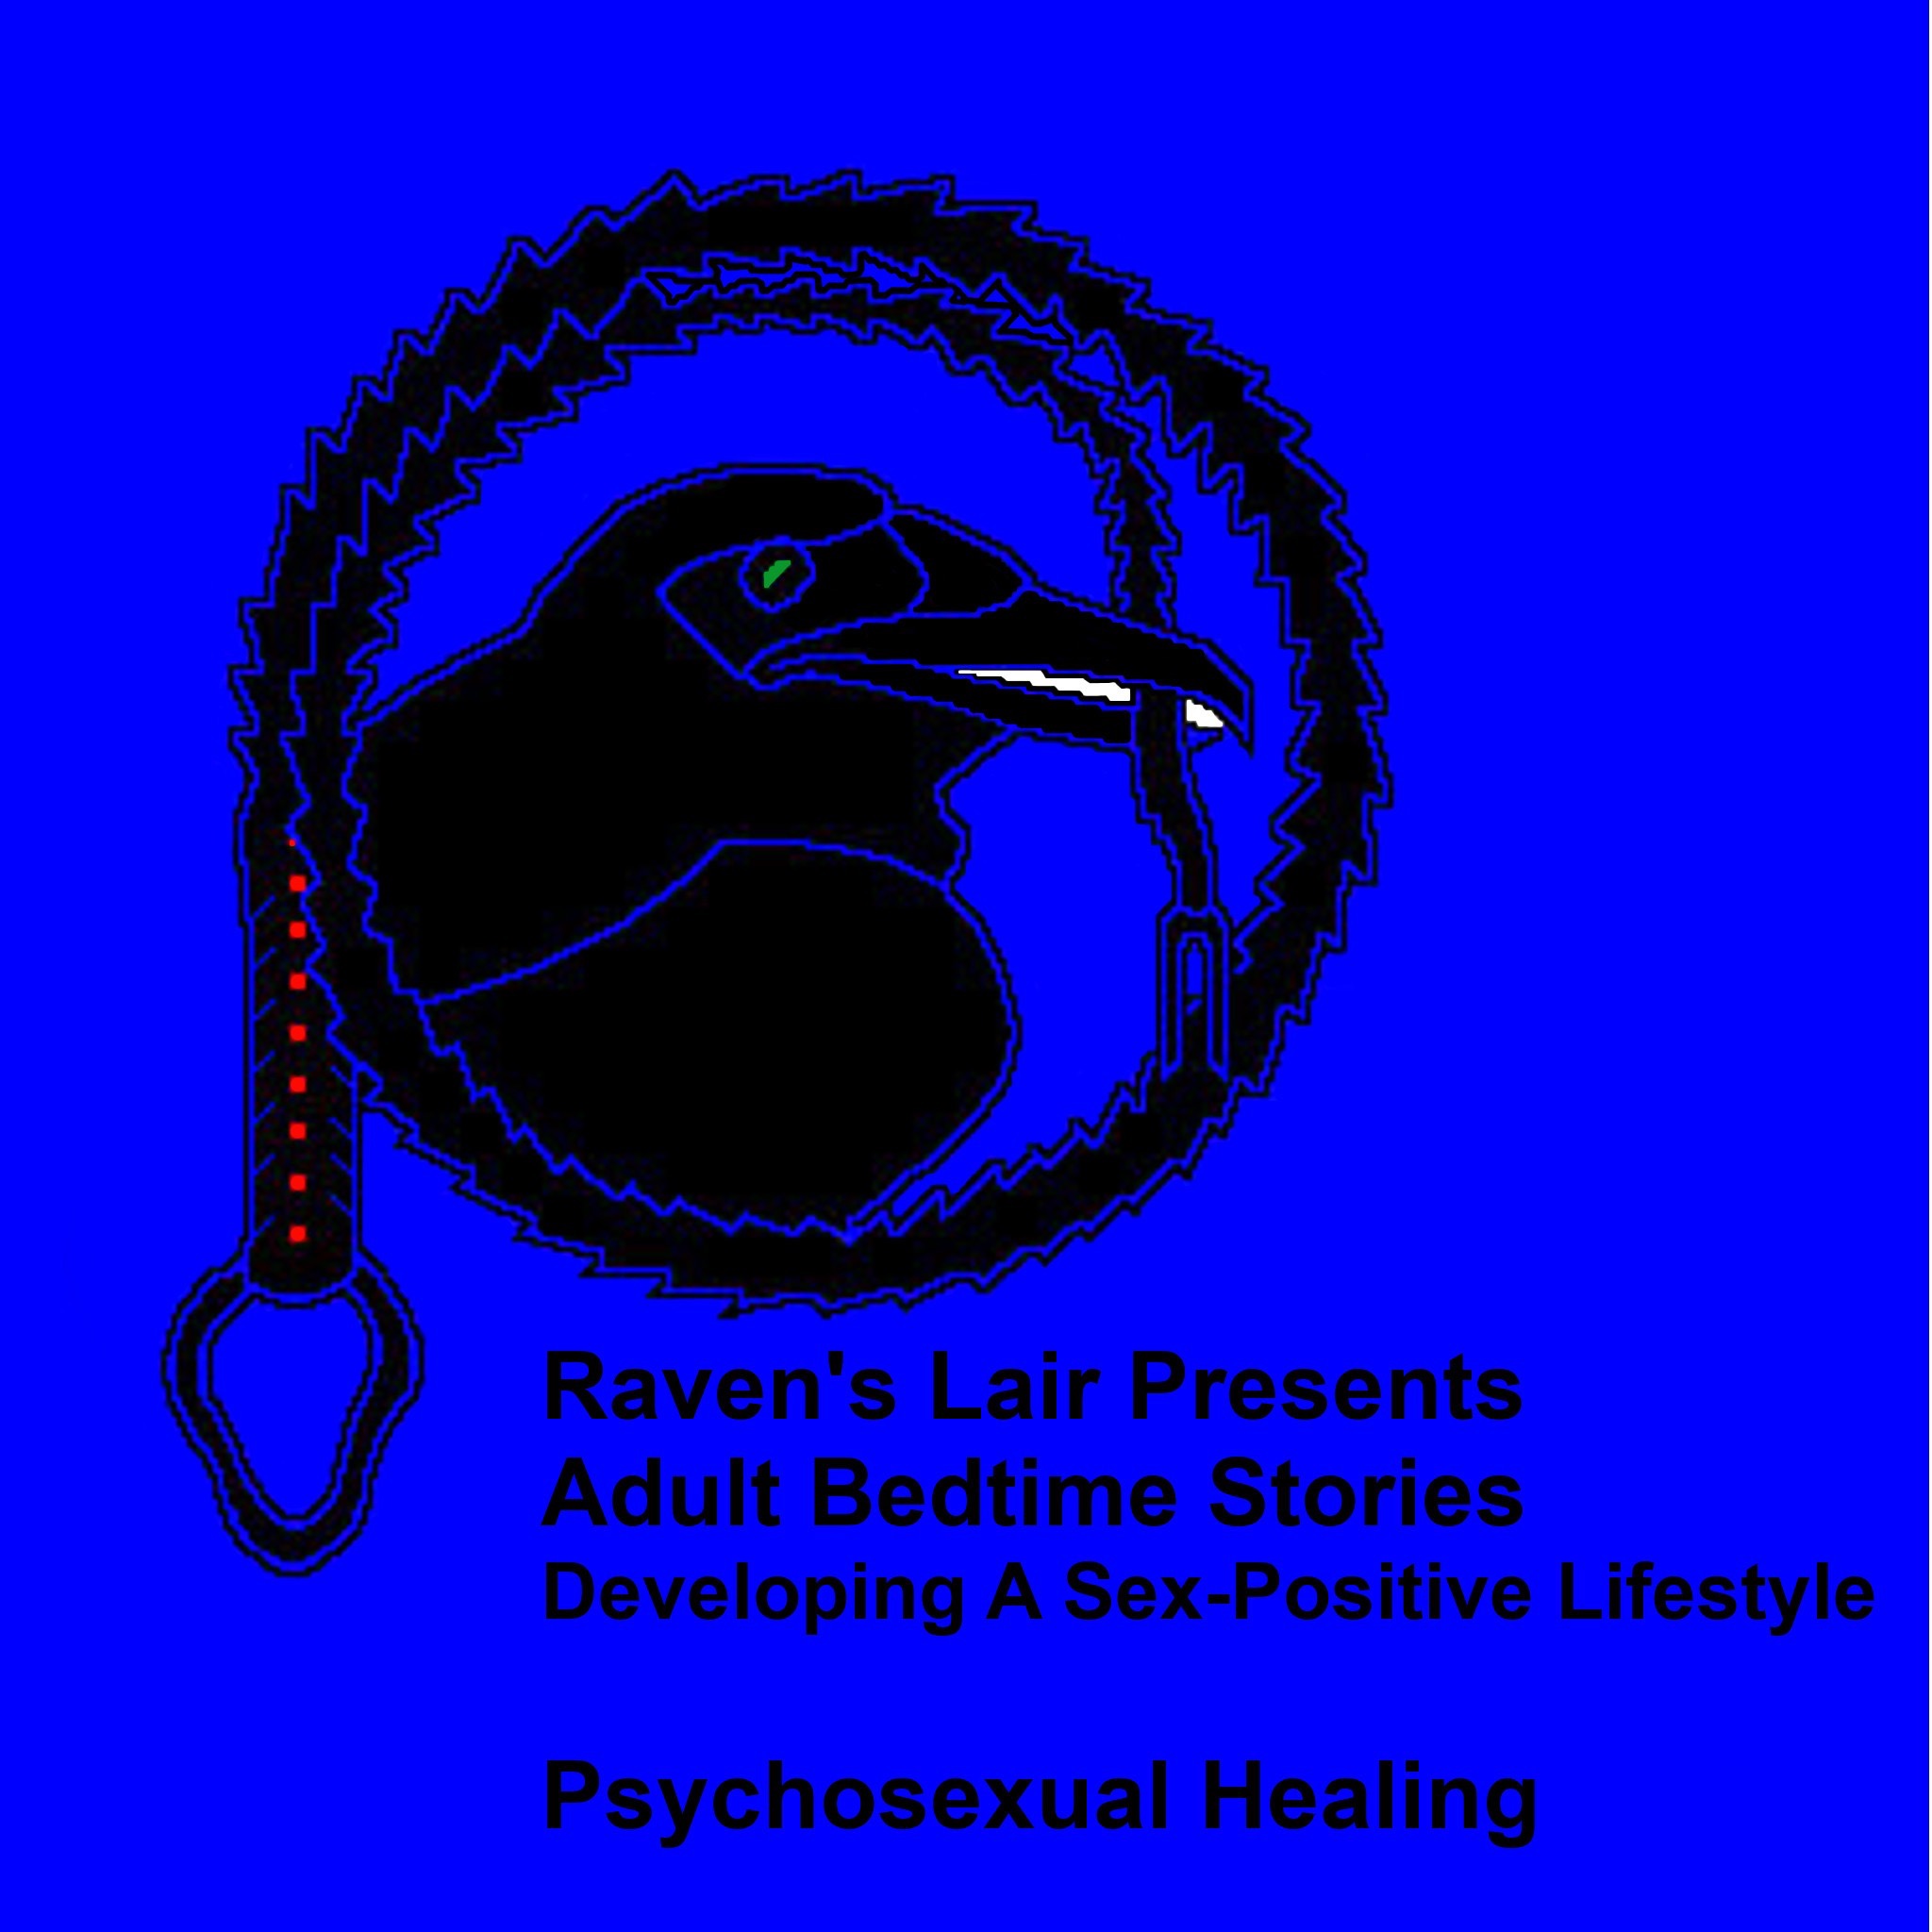 Psychosexual Healing: BDSM Role Play & Sacred Sex